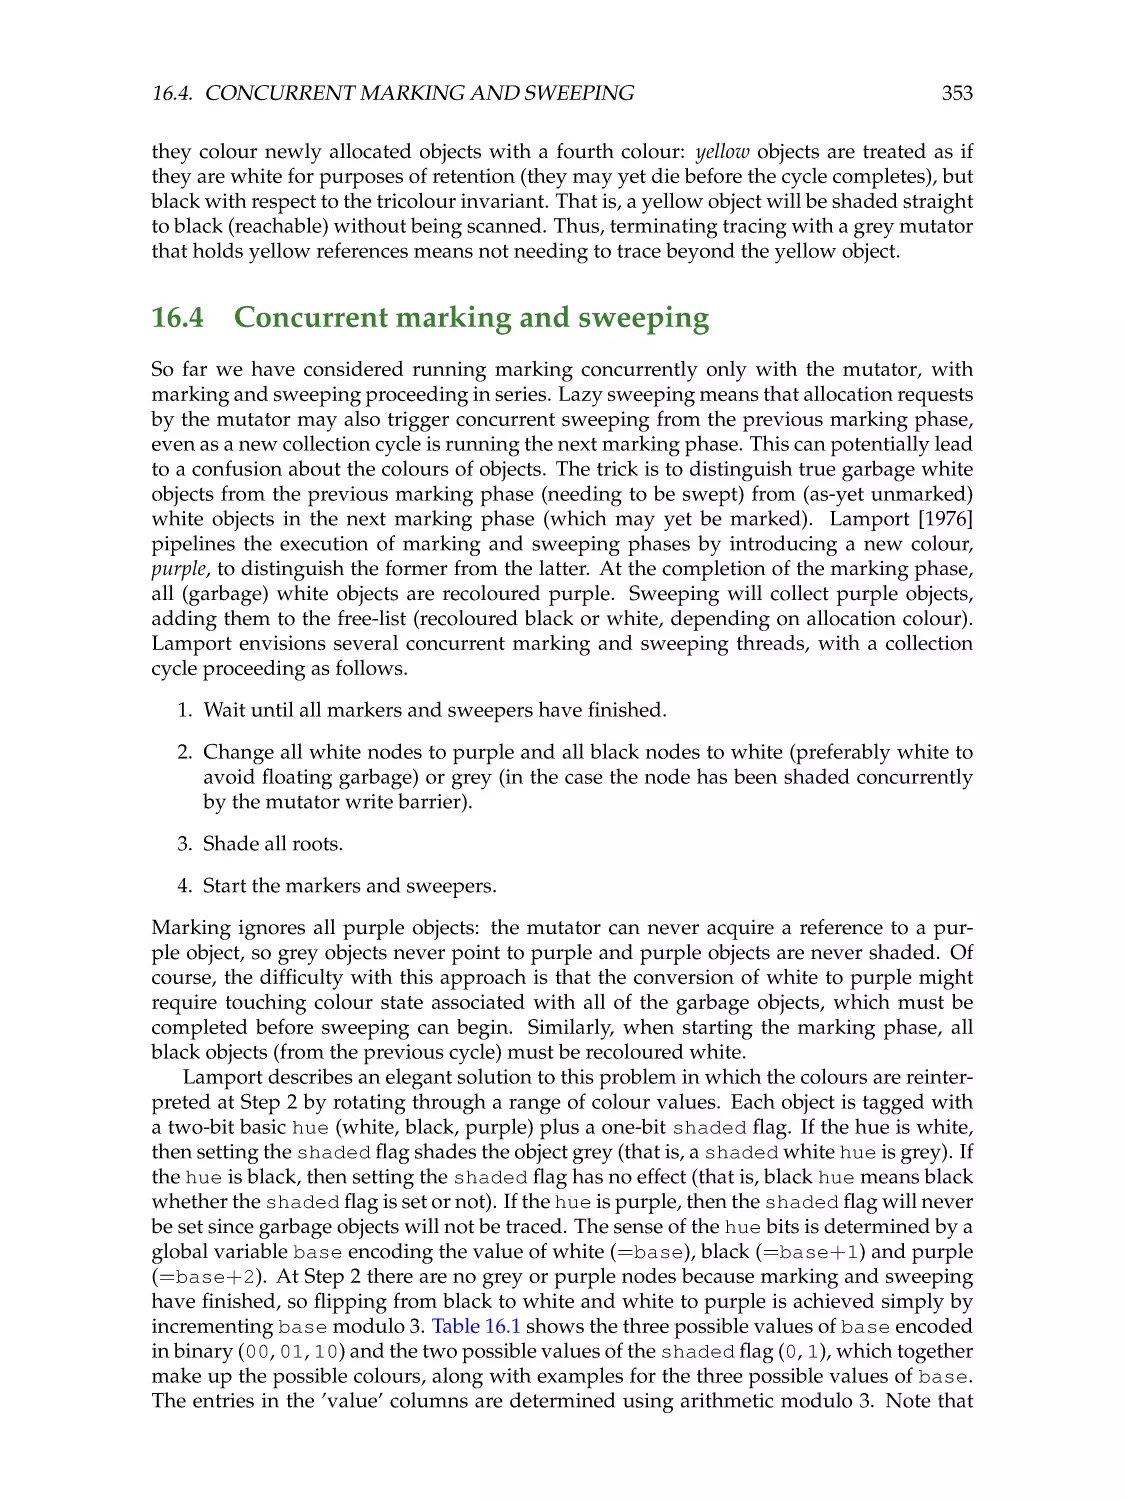 16.4. Concurrent marking and sweeping